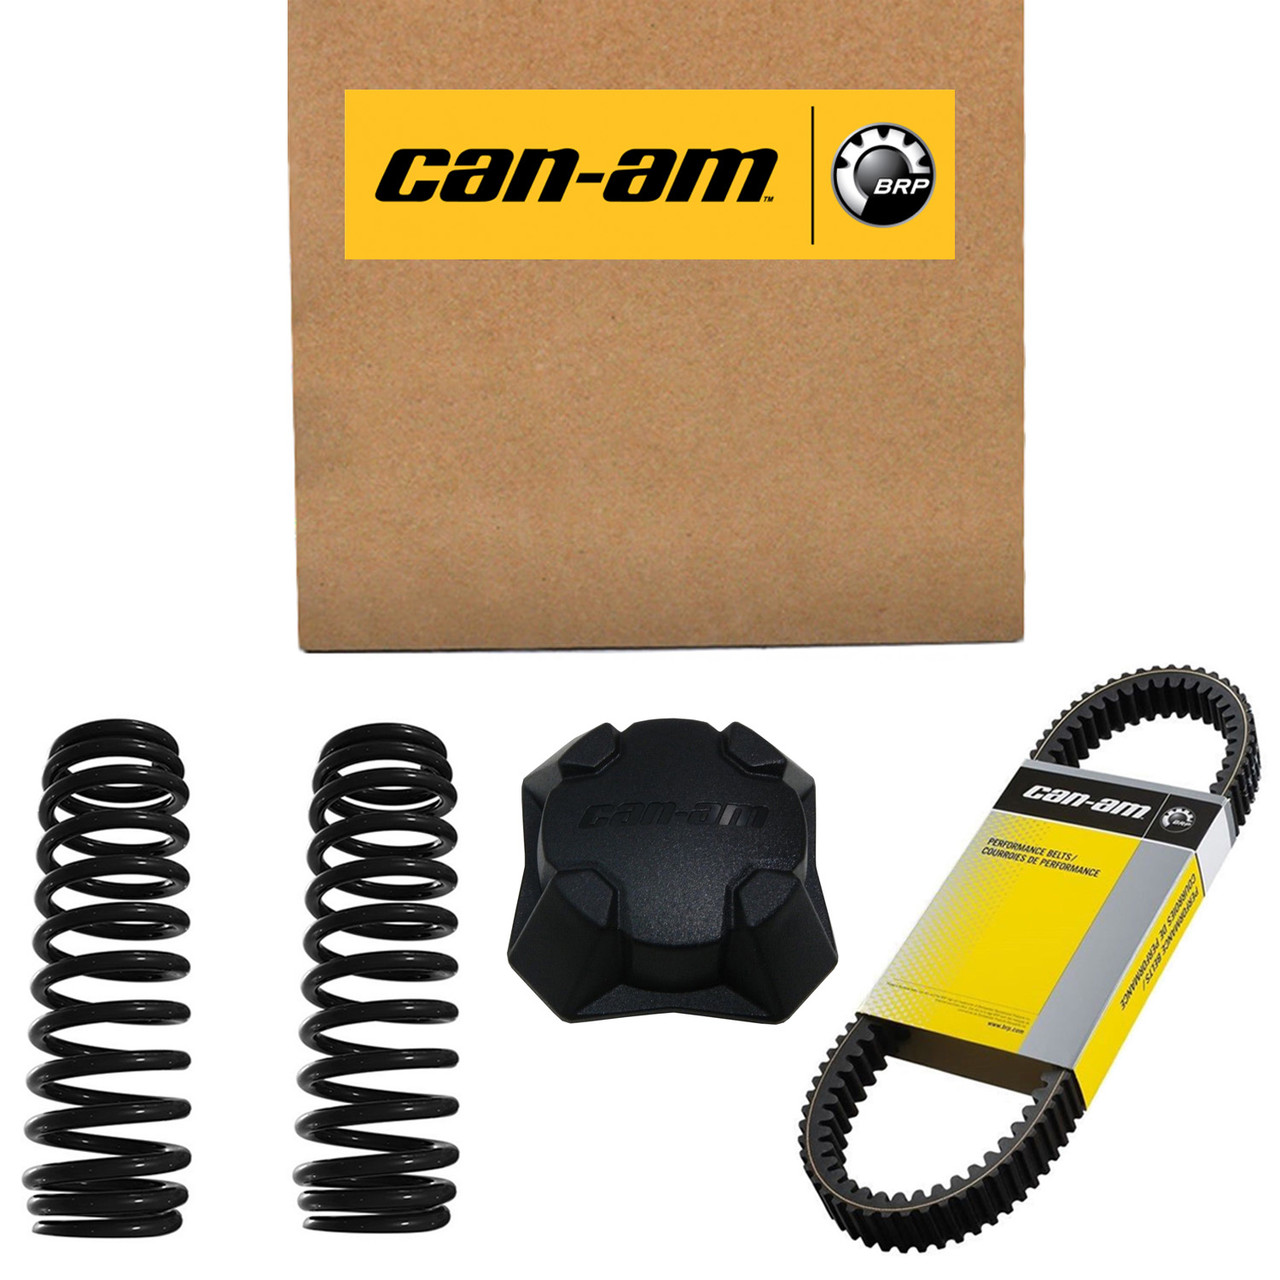 Can-Am New OEM Lh Acces Panel, 708400301